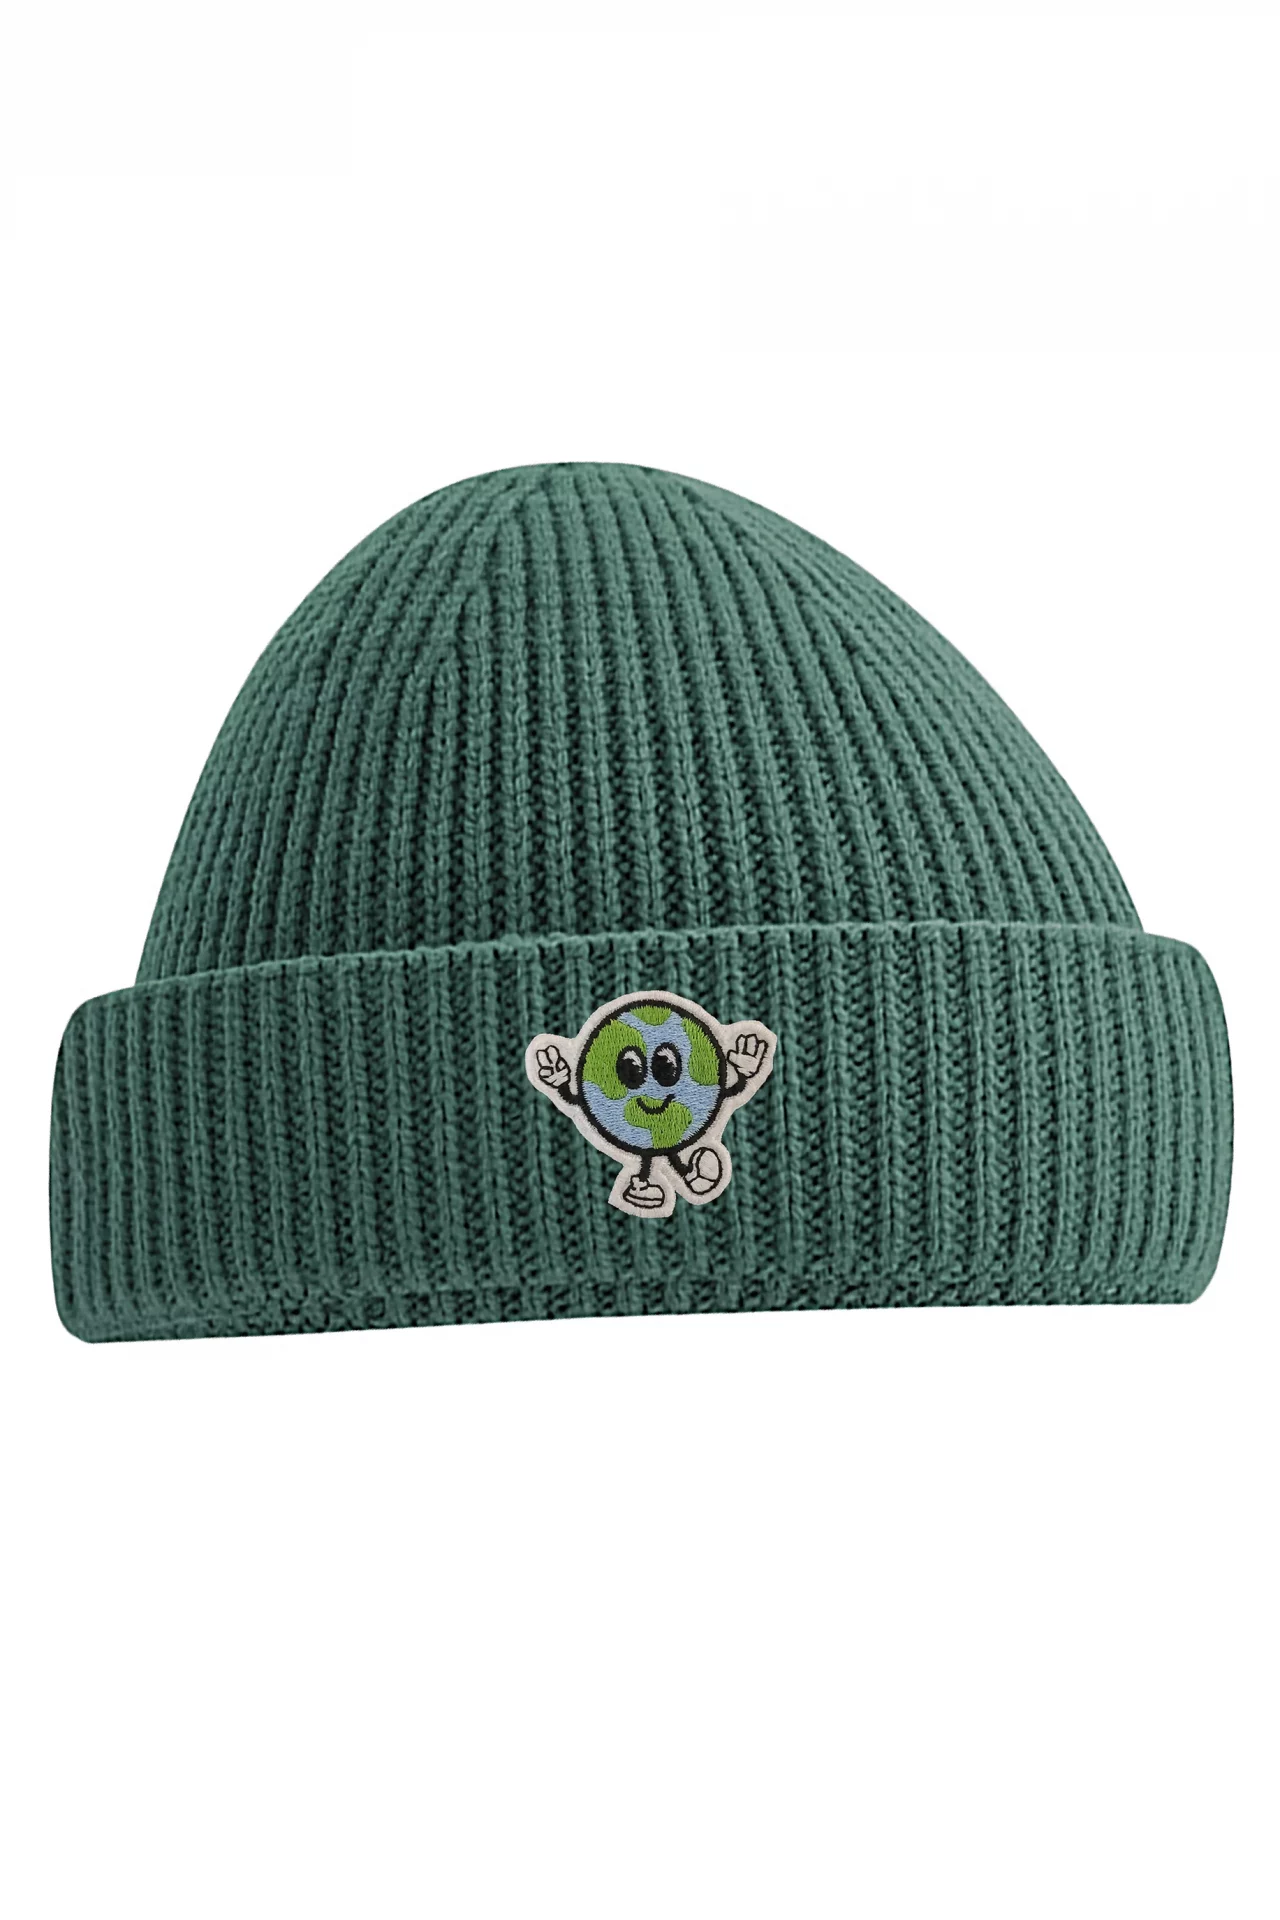 Green beanie with a world illustration embroided